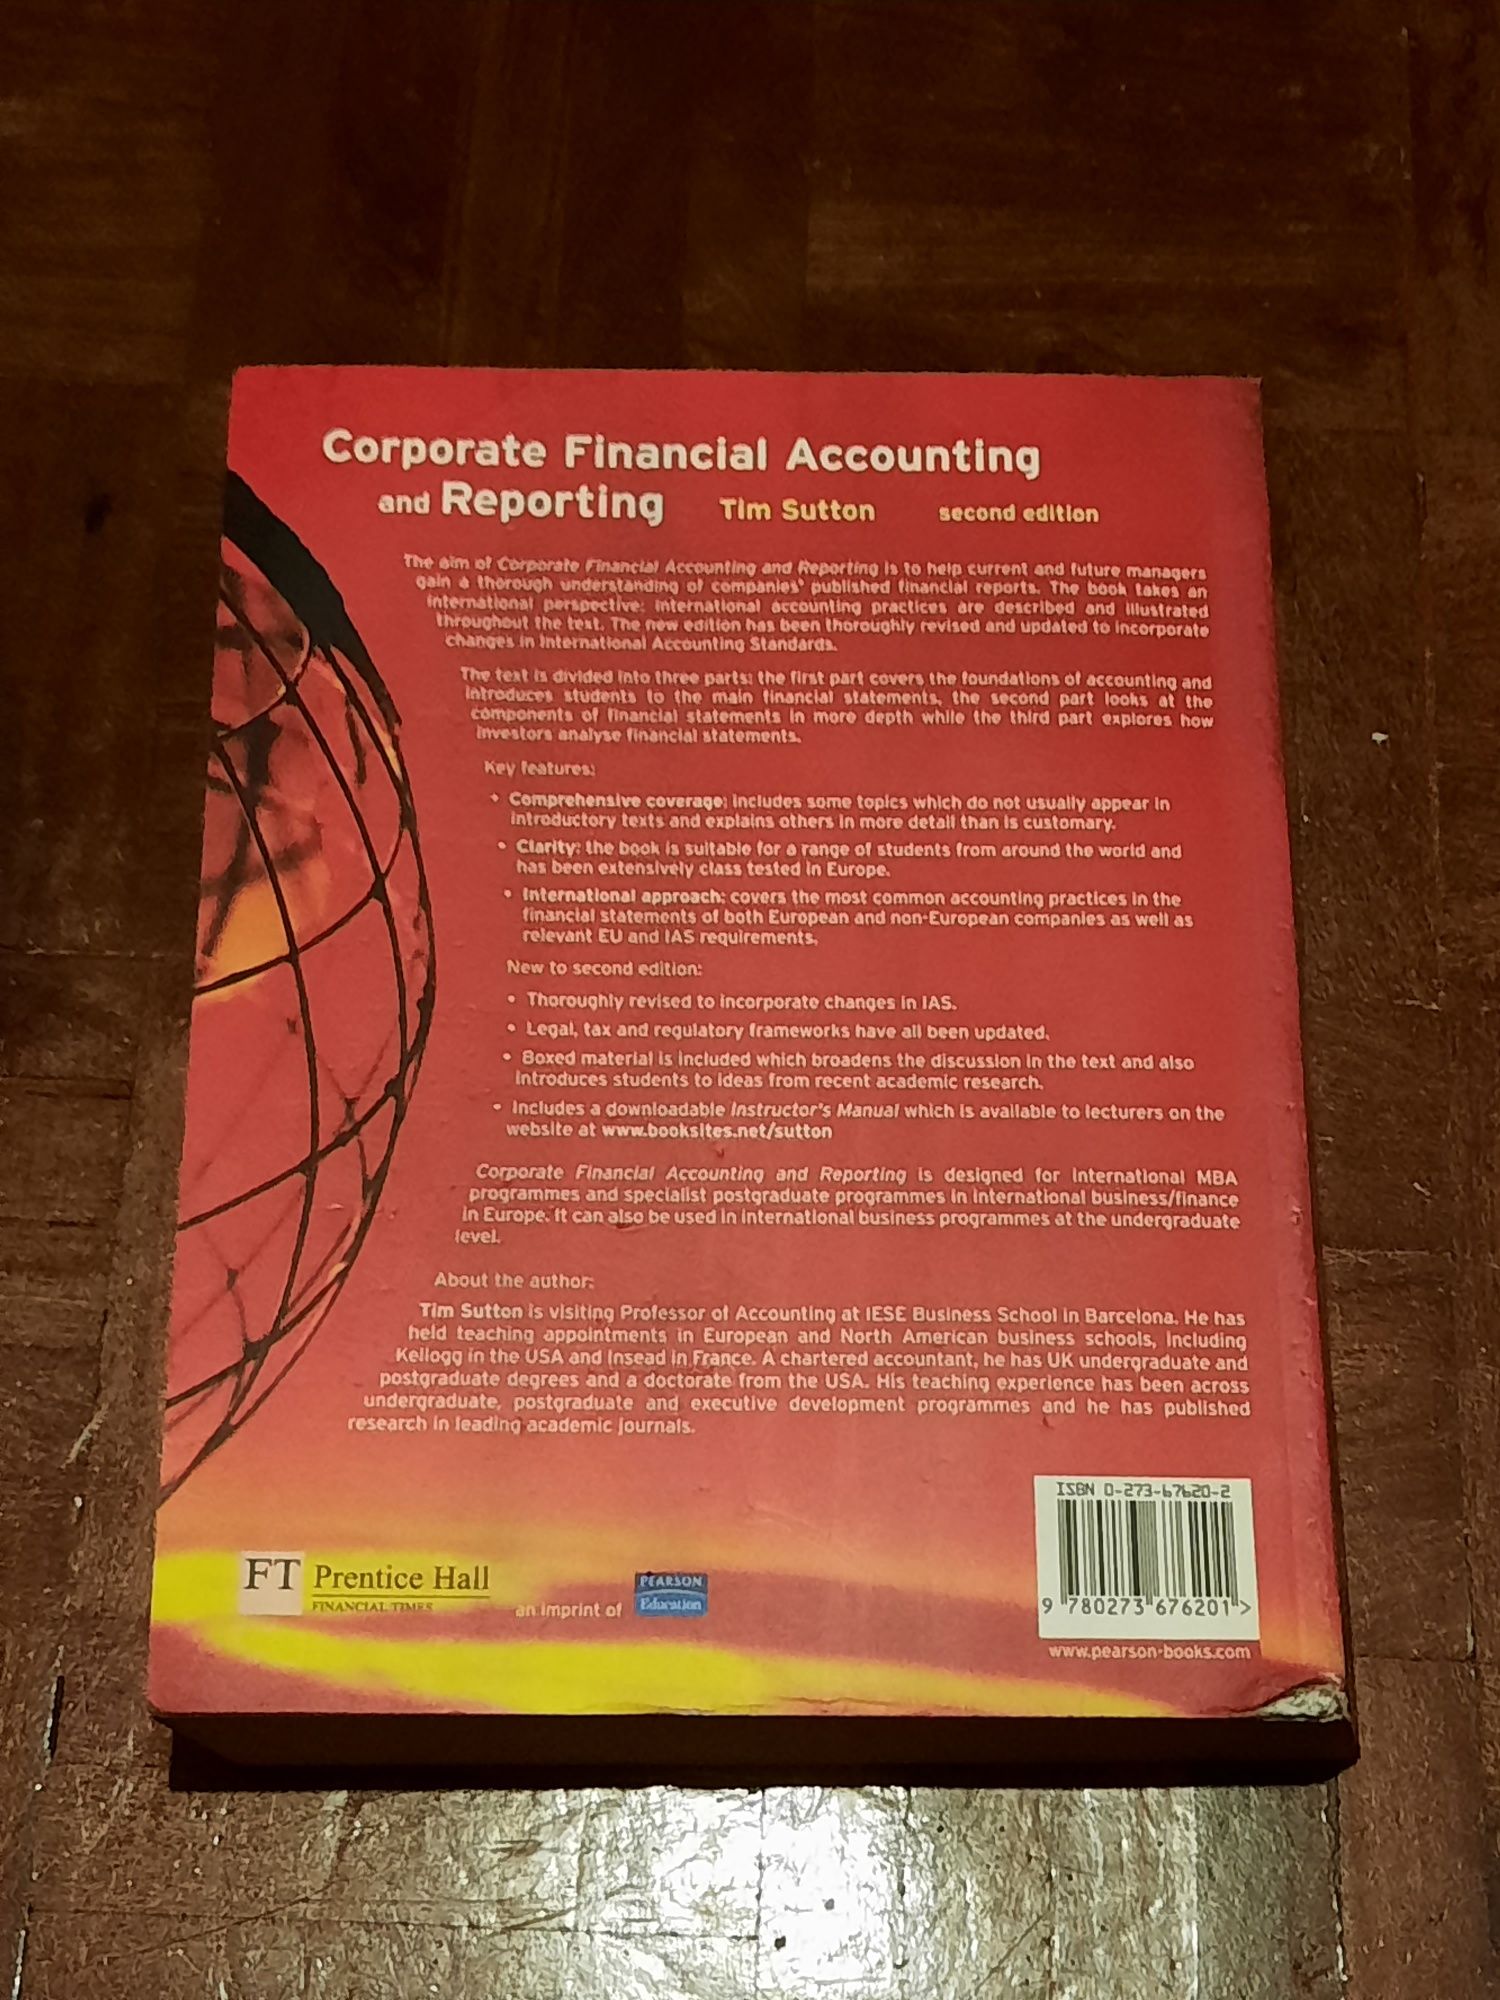 Livro corporate financial accounting and reporting (tim sutton)